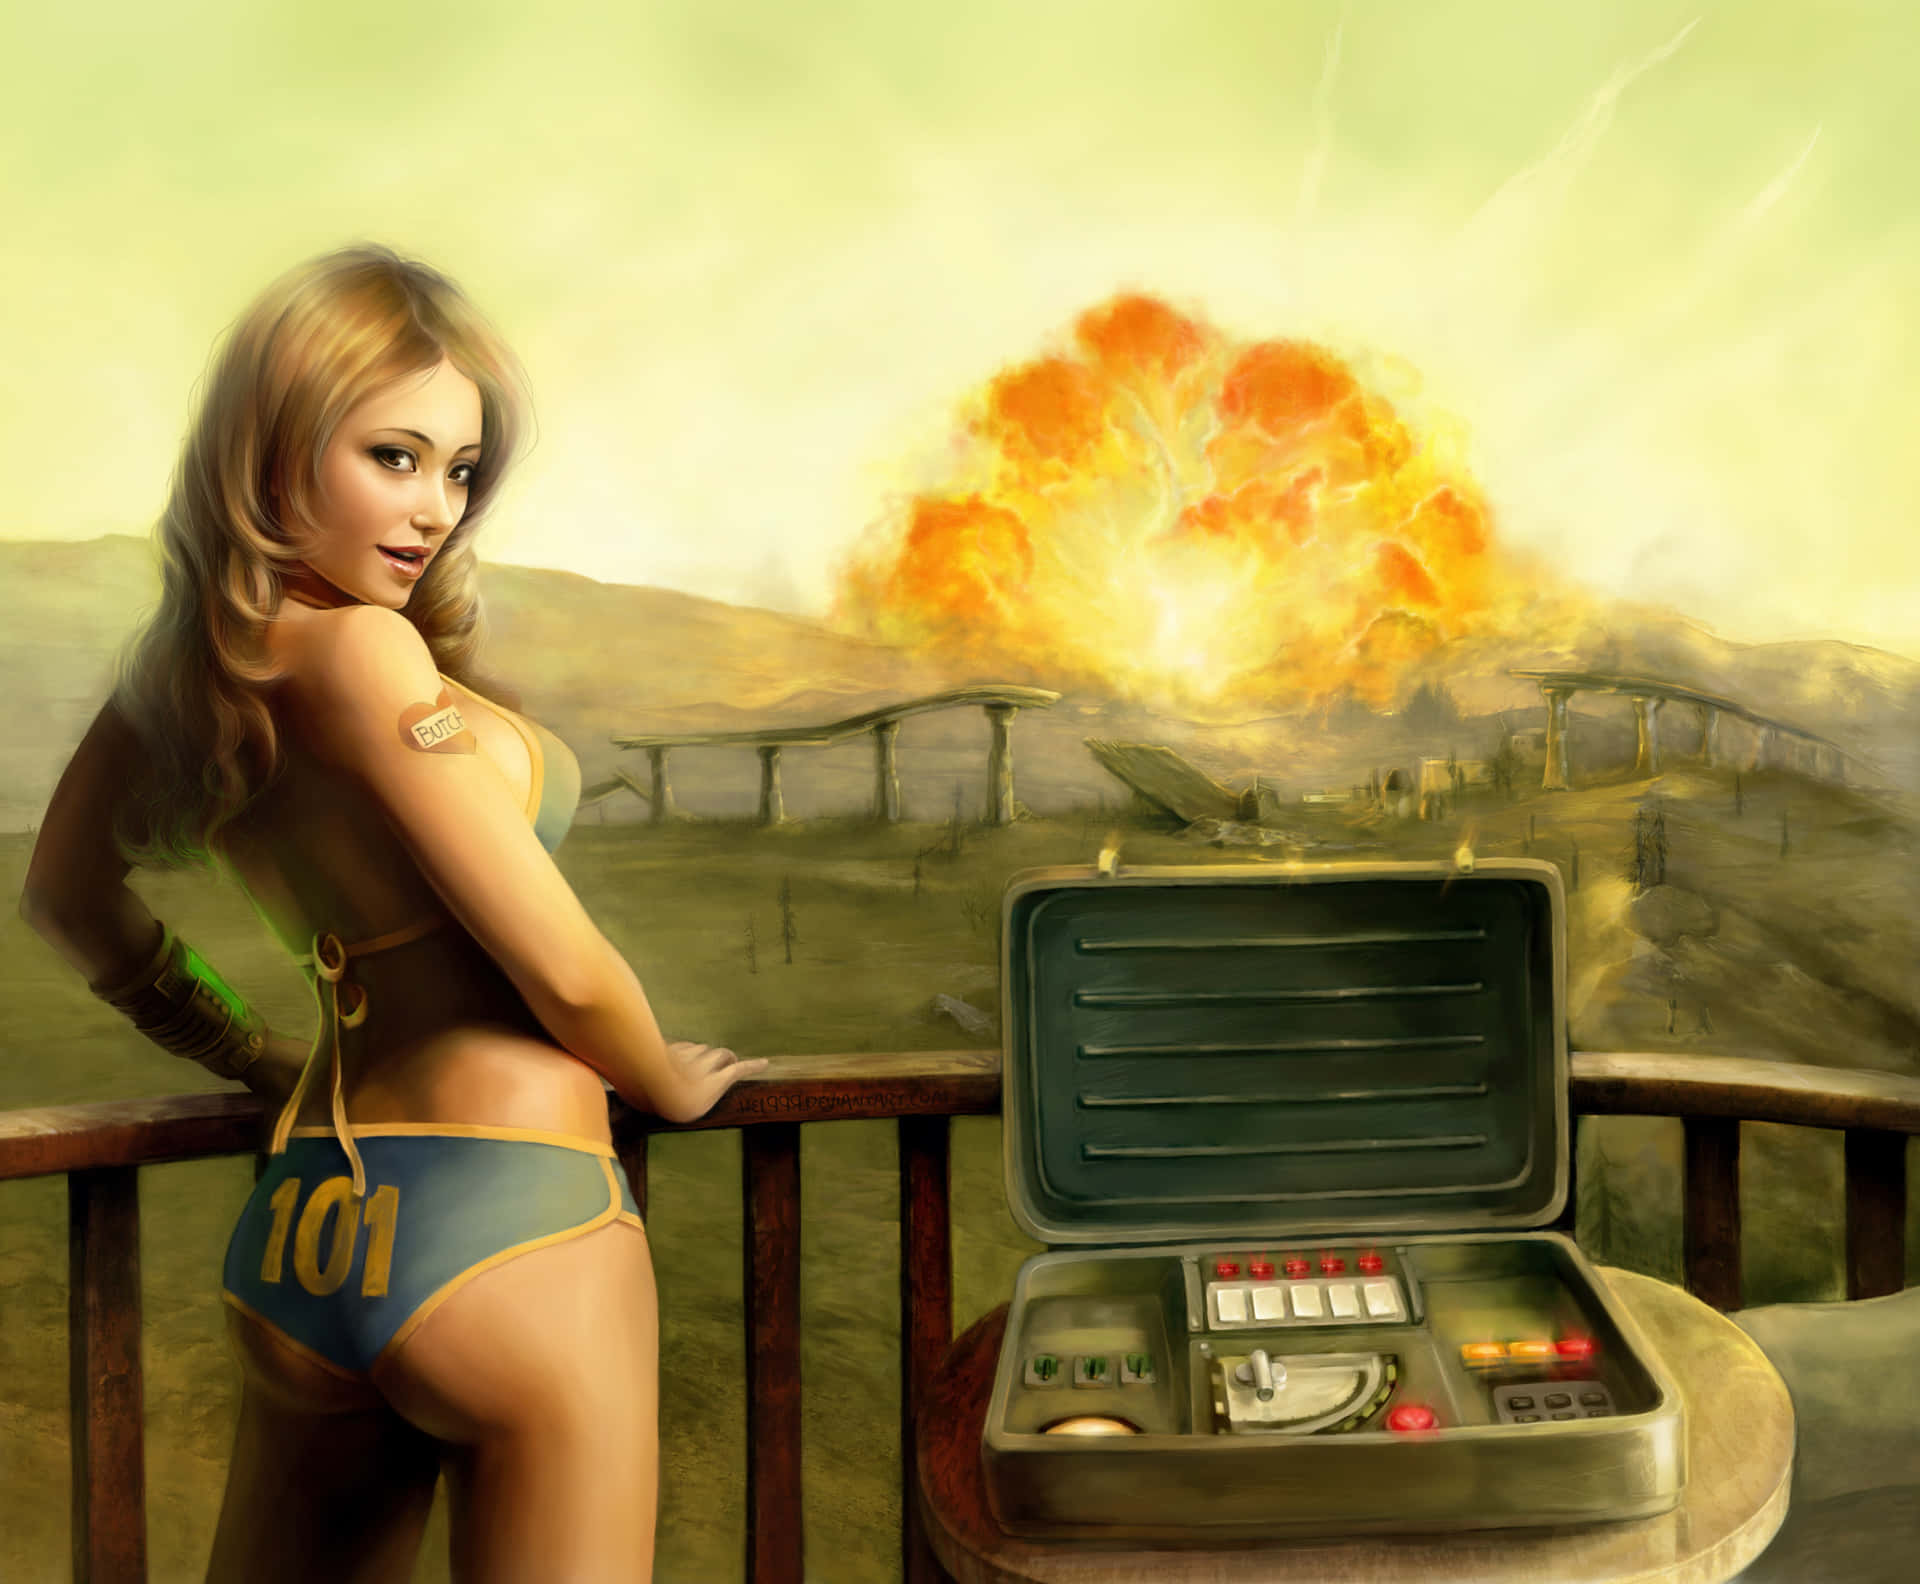 Sexy Image Of Woman With Explosion Wallpaper